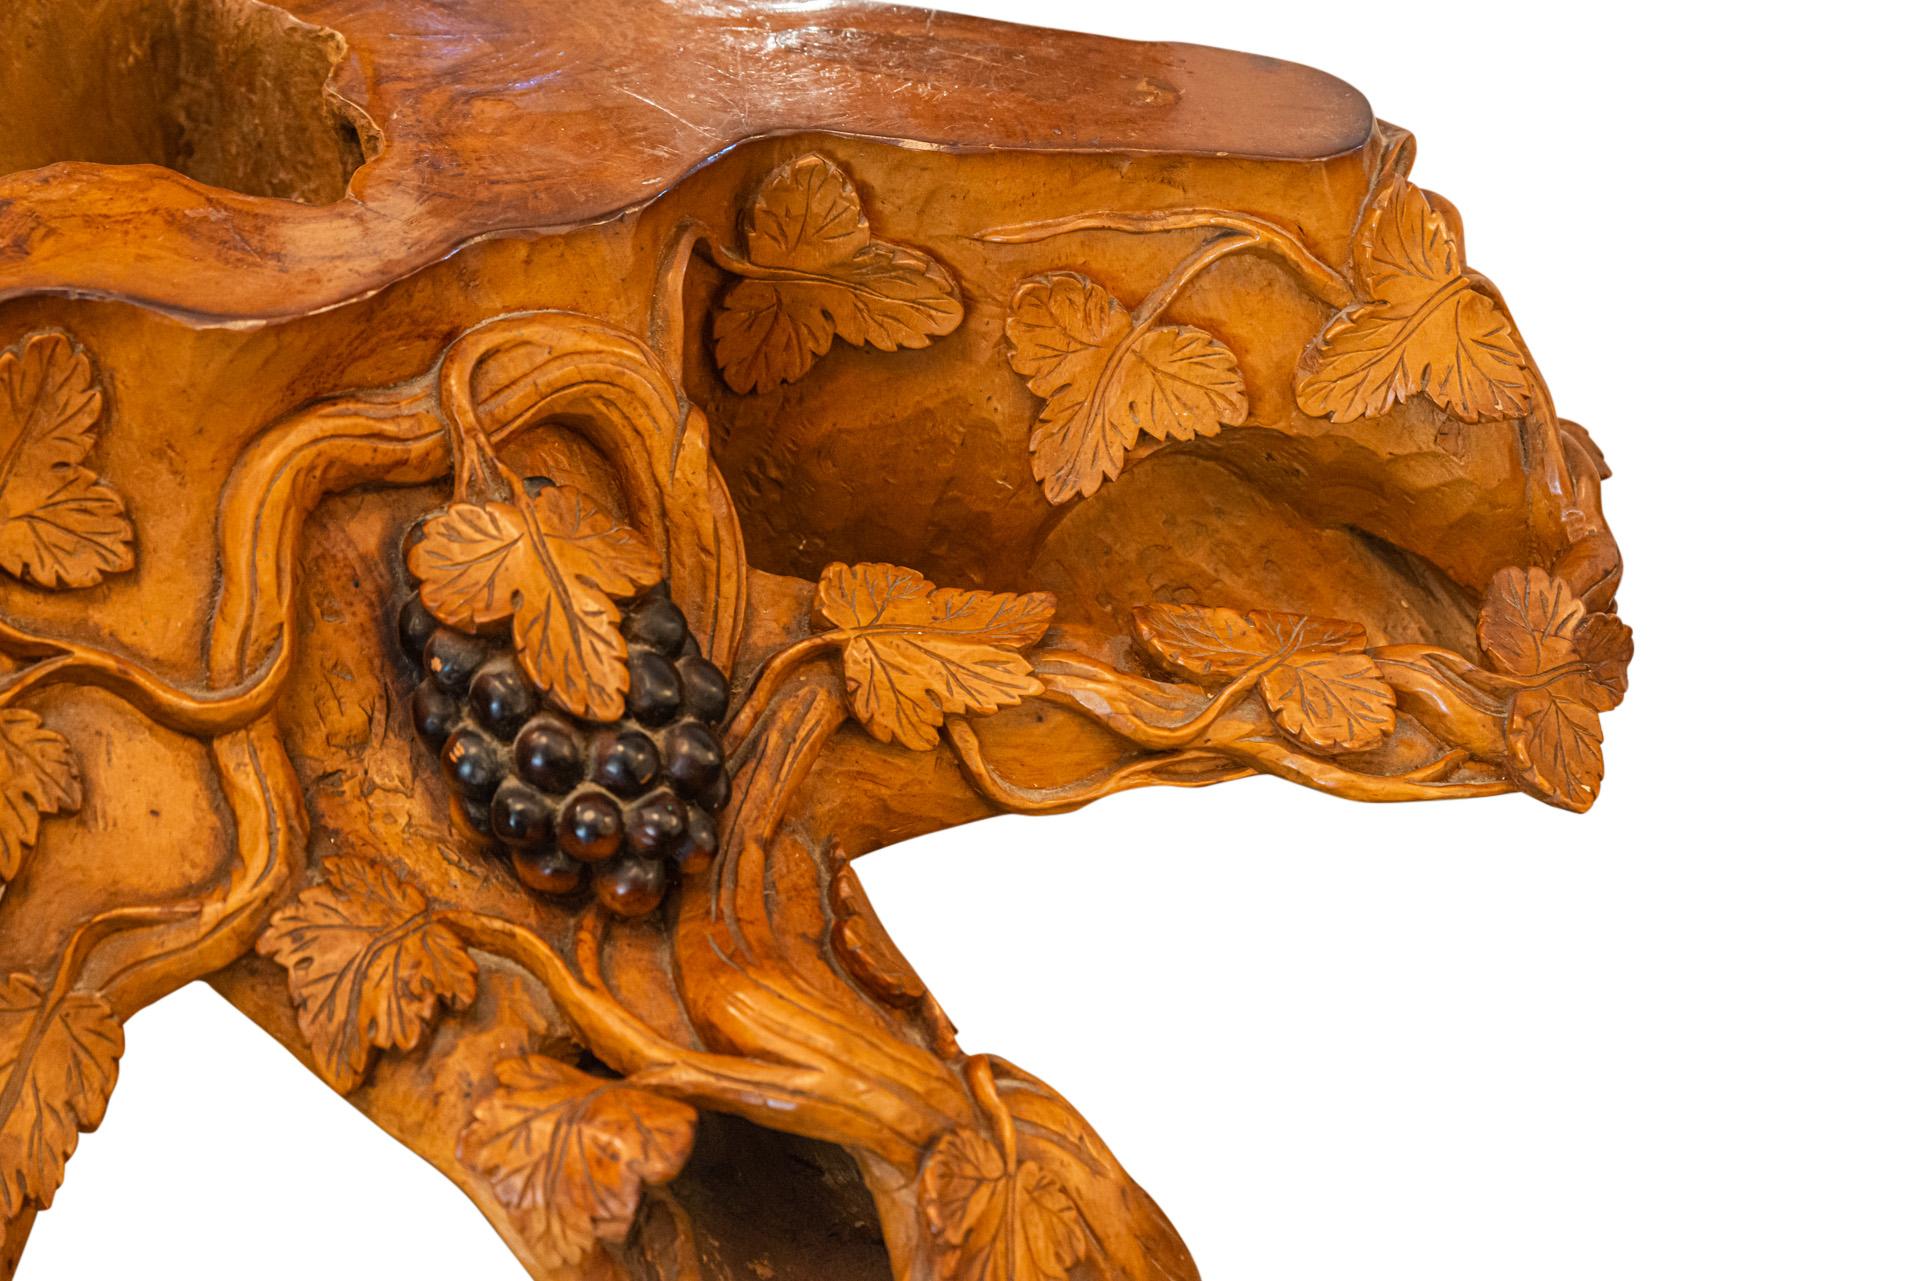 Important coffee table,
Carved and stained walnut,
Vine decor,
Beautiful patina,
circa 1900, France. 

Measures : Width 133 cm, Depth 123 cm, Height 50 cm.

We can make glass top on demand.